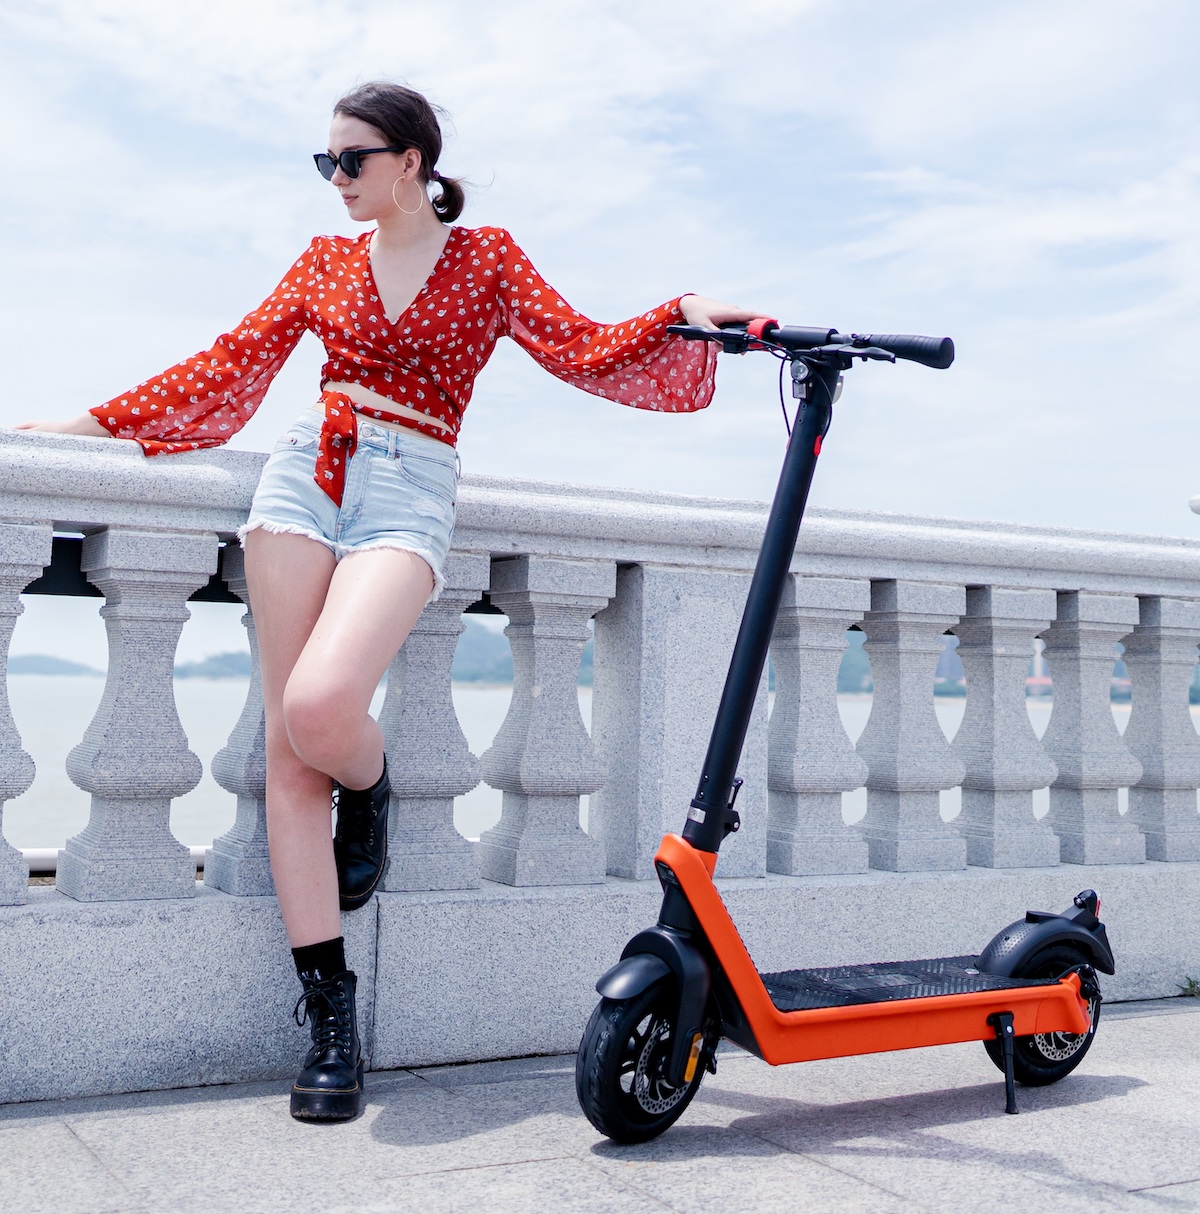 The new Komeet X9 e-scooter makes its debut as it brings longer range autonomy to users